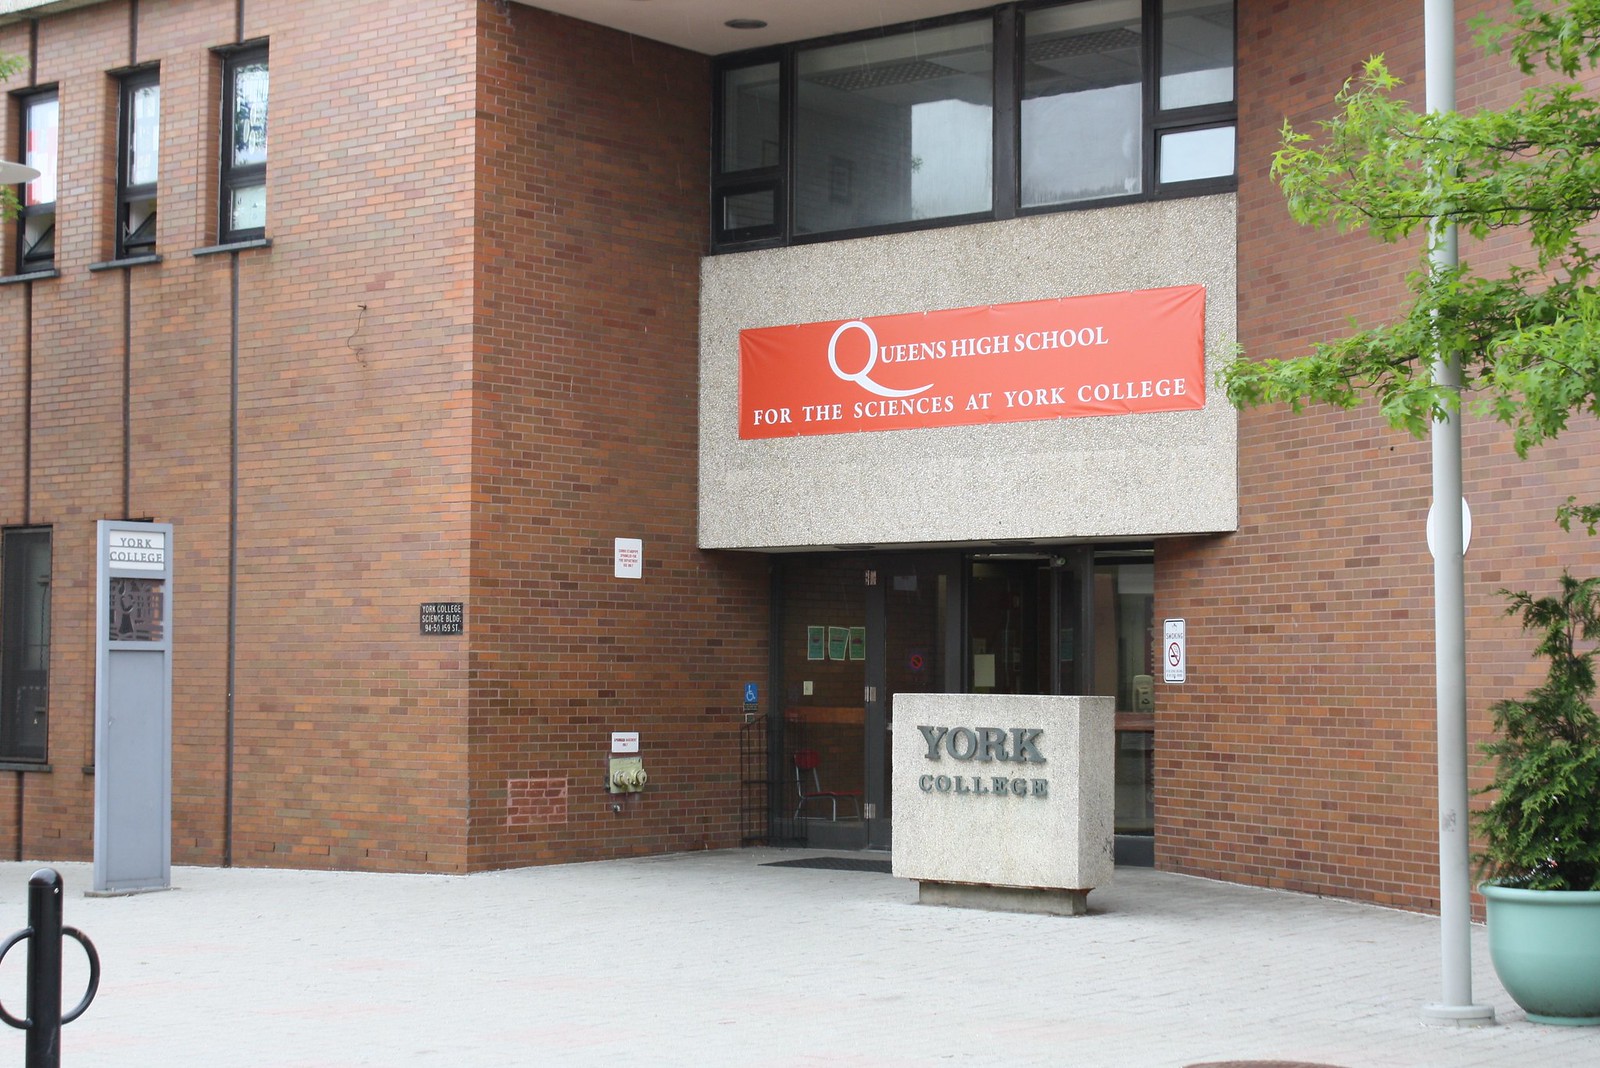 Queens High School for the Sciences at York College